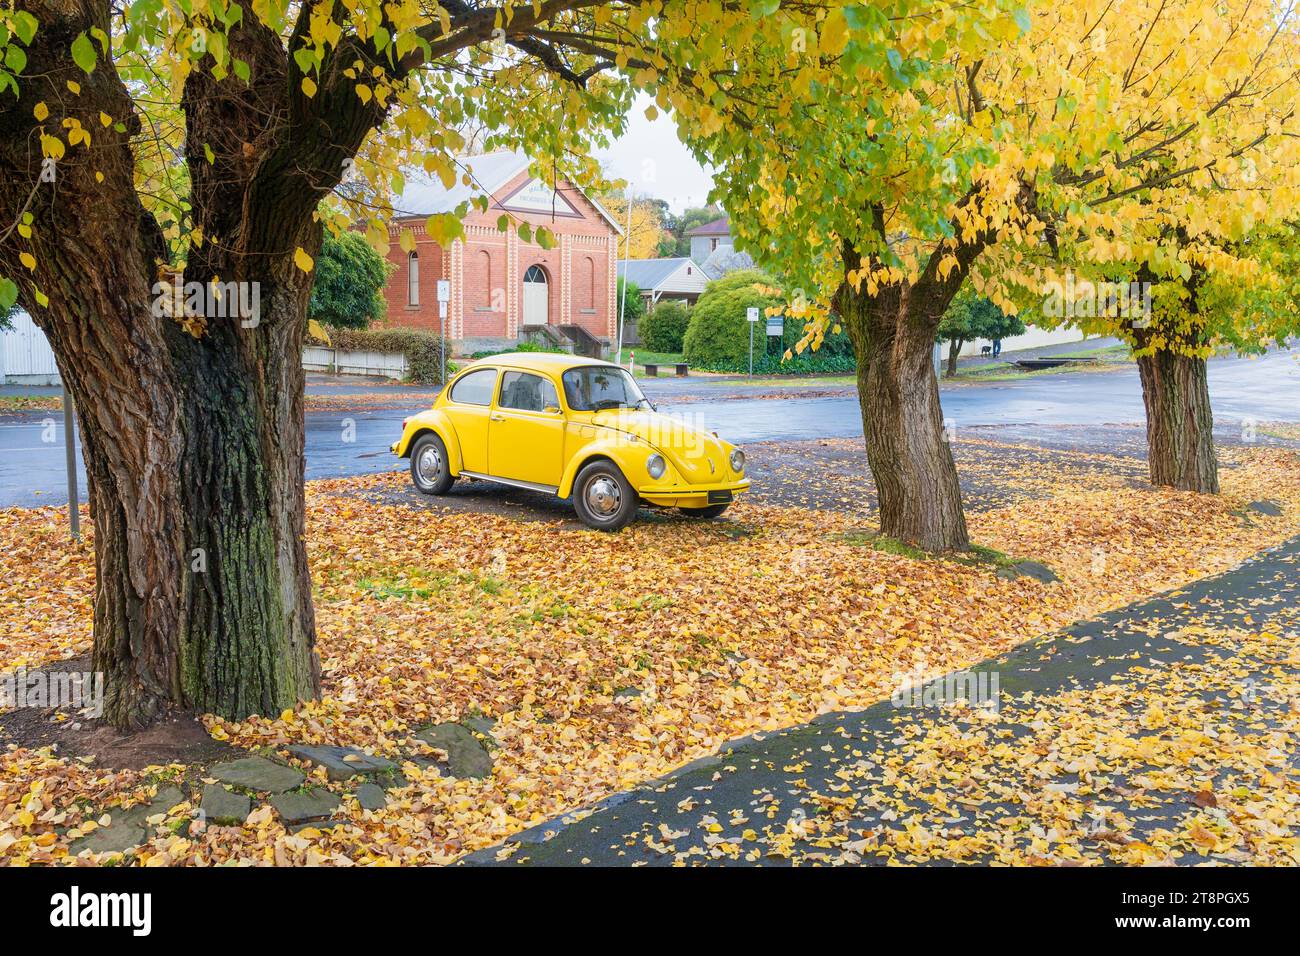 A bright yellow car parked over colourful autumn leaves between elm trees at Maldon in Central Victoria, Australia Stock Photo